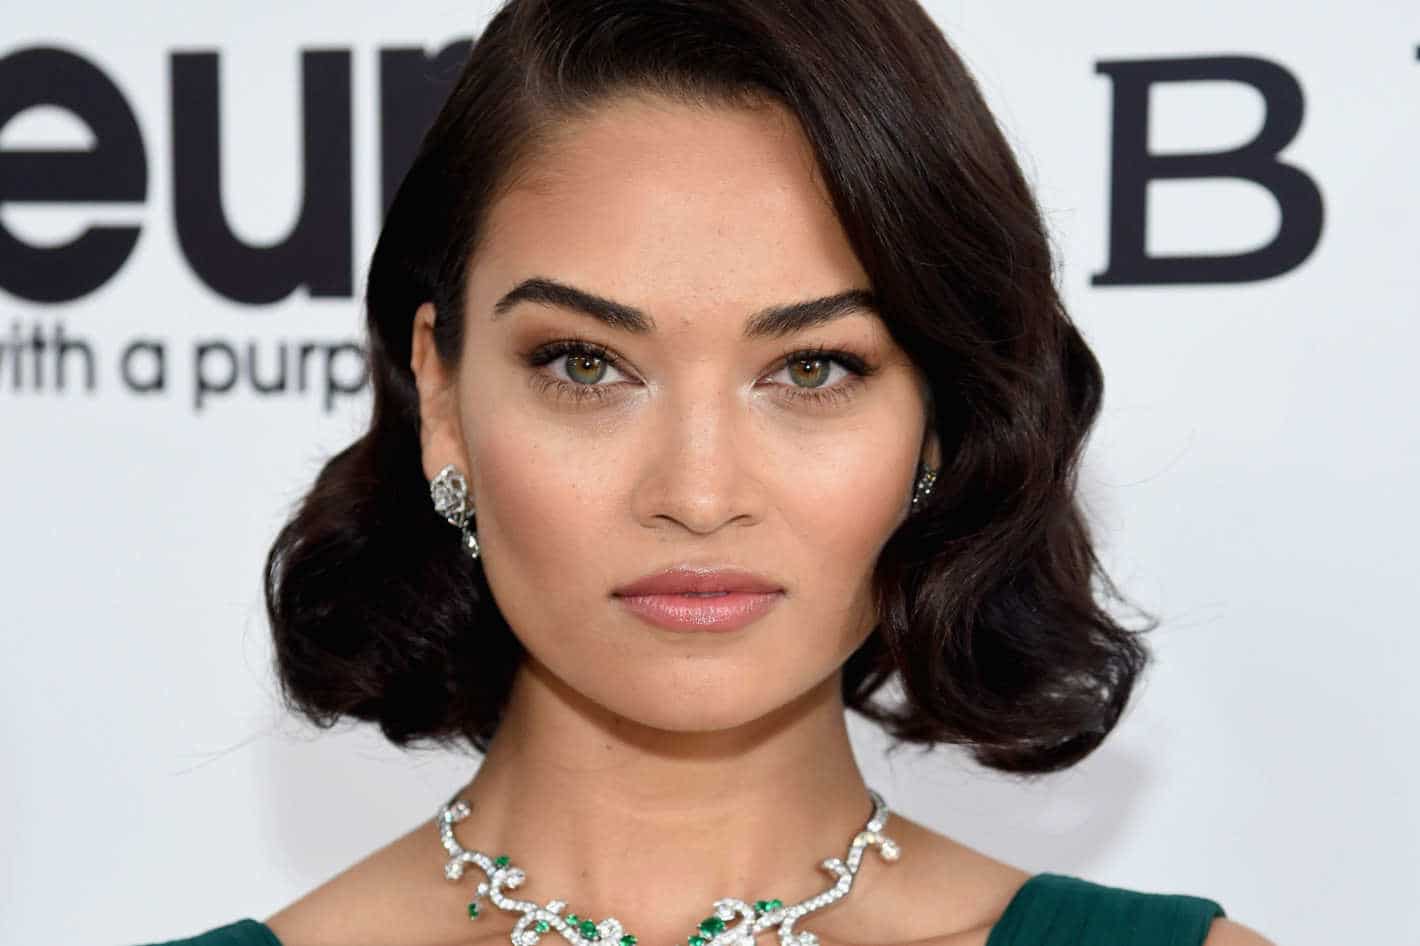 Shanina Shaik 1 Arena Pile Top 10 Most Hottest Australian Models In The World